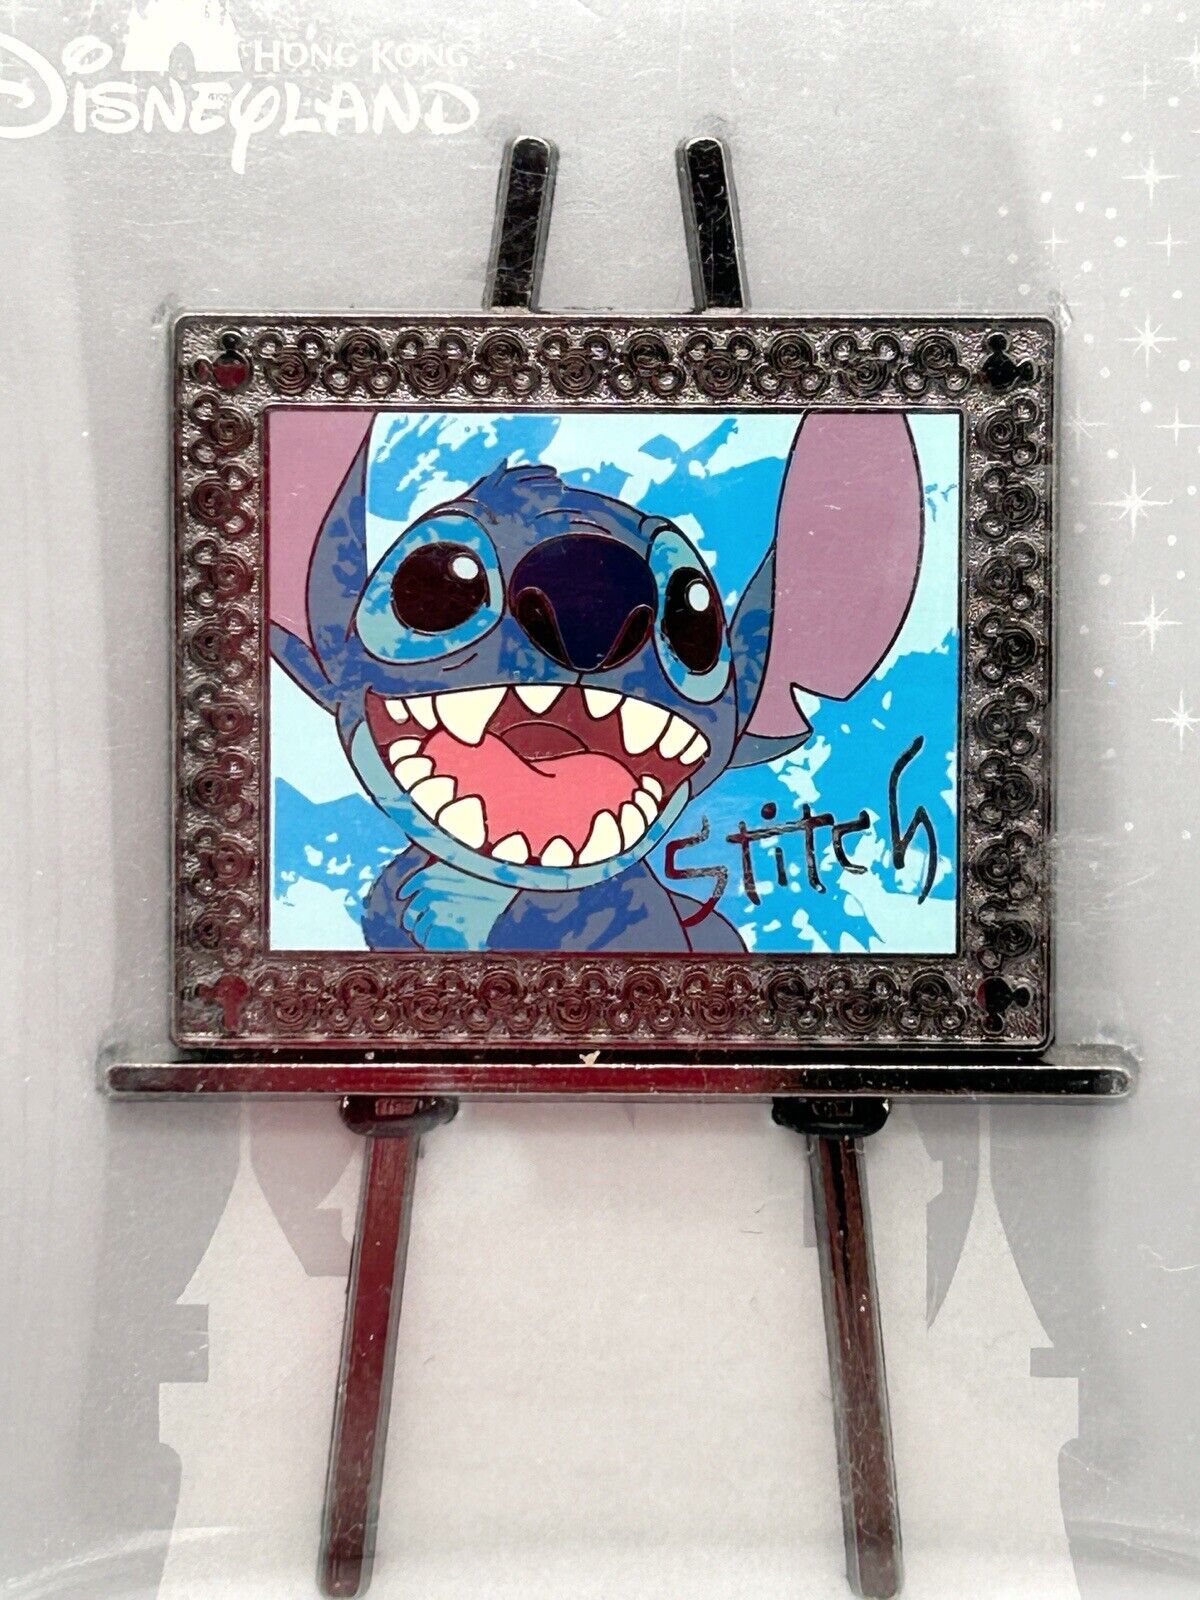 DISNEY PIN 🌺STITCH🌺 Hong Kong Disneyland Limited Release Park Exclusive - 800